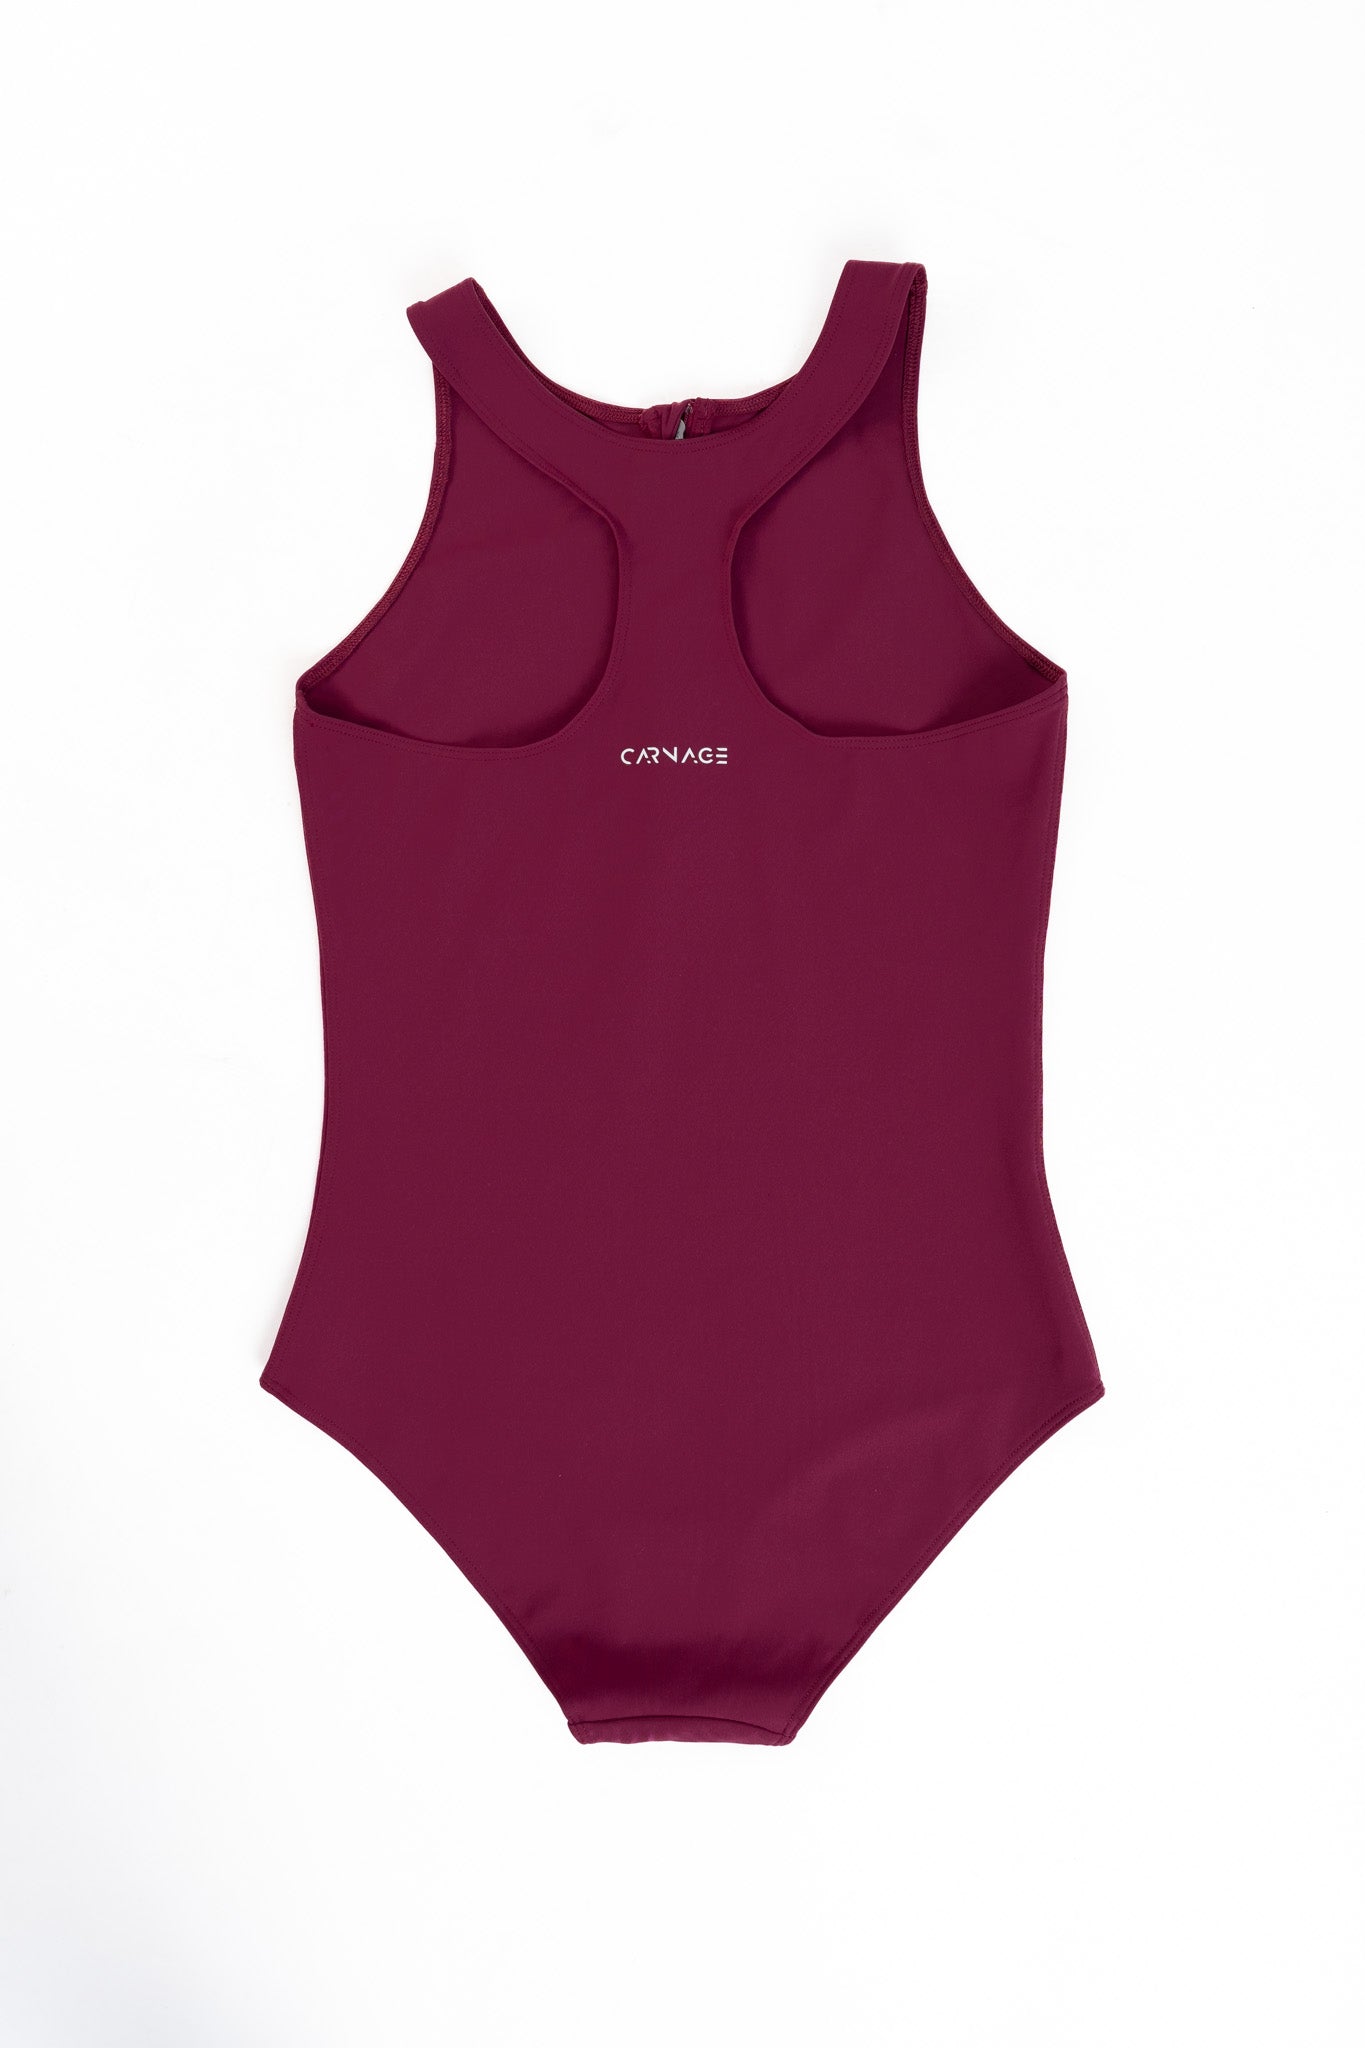 Refined Zip Up Bodysuit - Twinberry Red